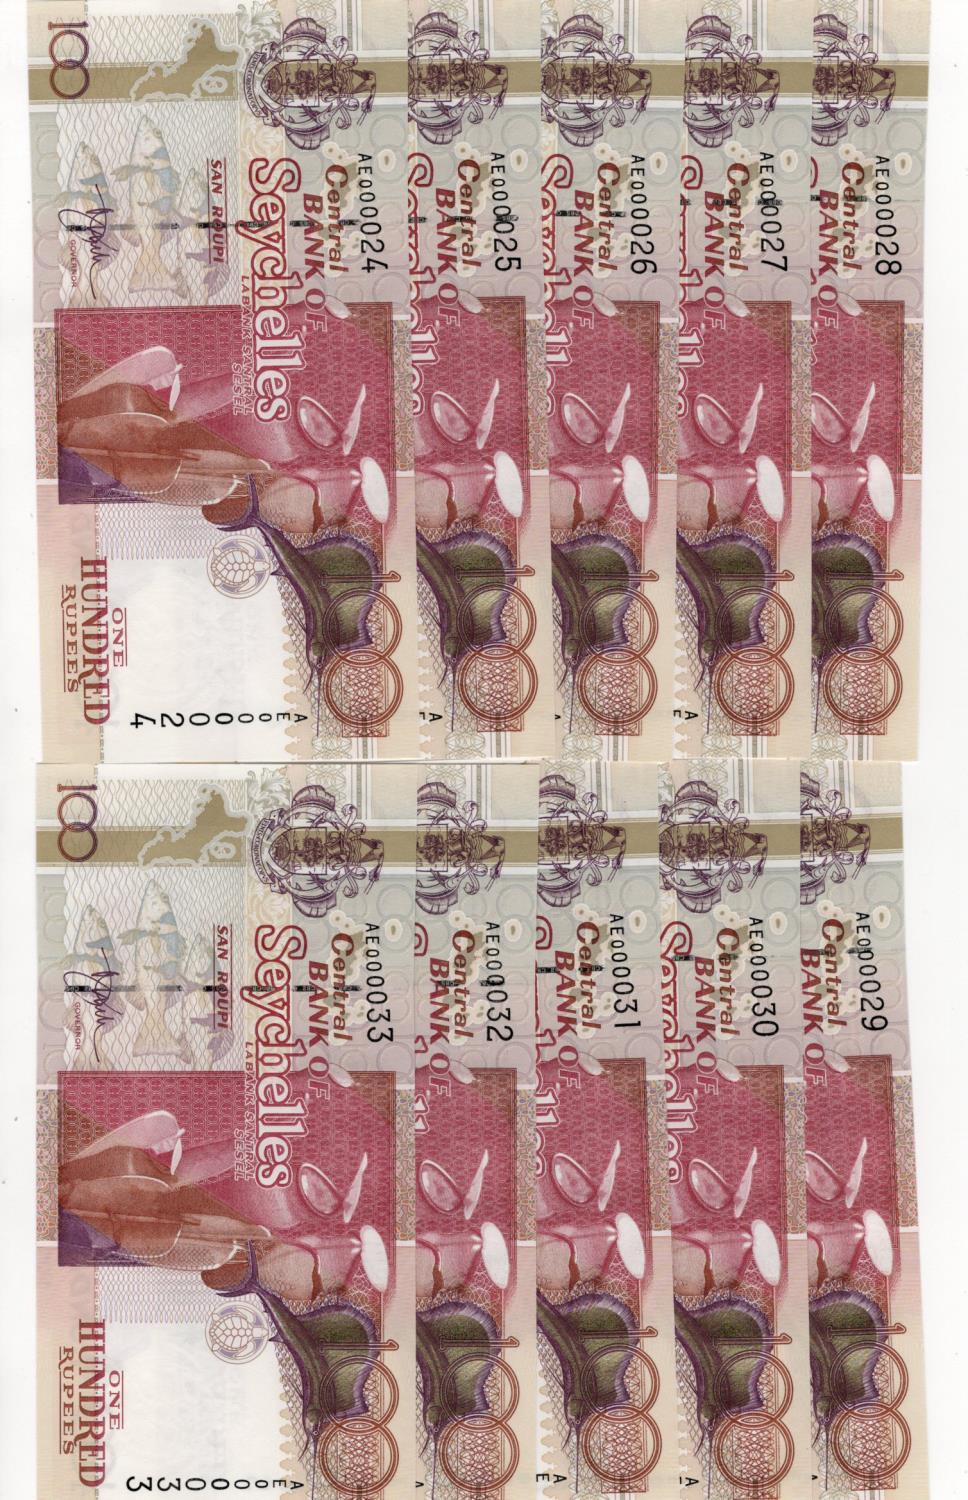 Seychelles 100 Rupees (10) issued 2001, a LOW No. consecutive run, serial AE 000024 - AE 000033, (